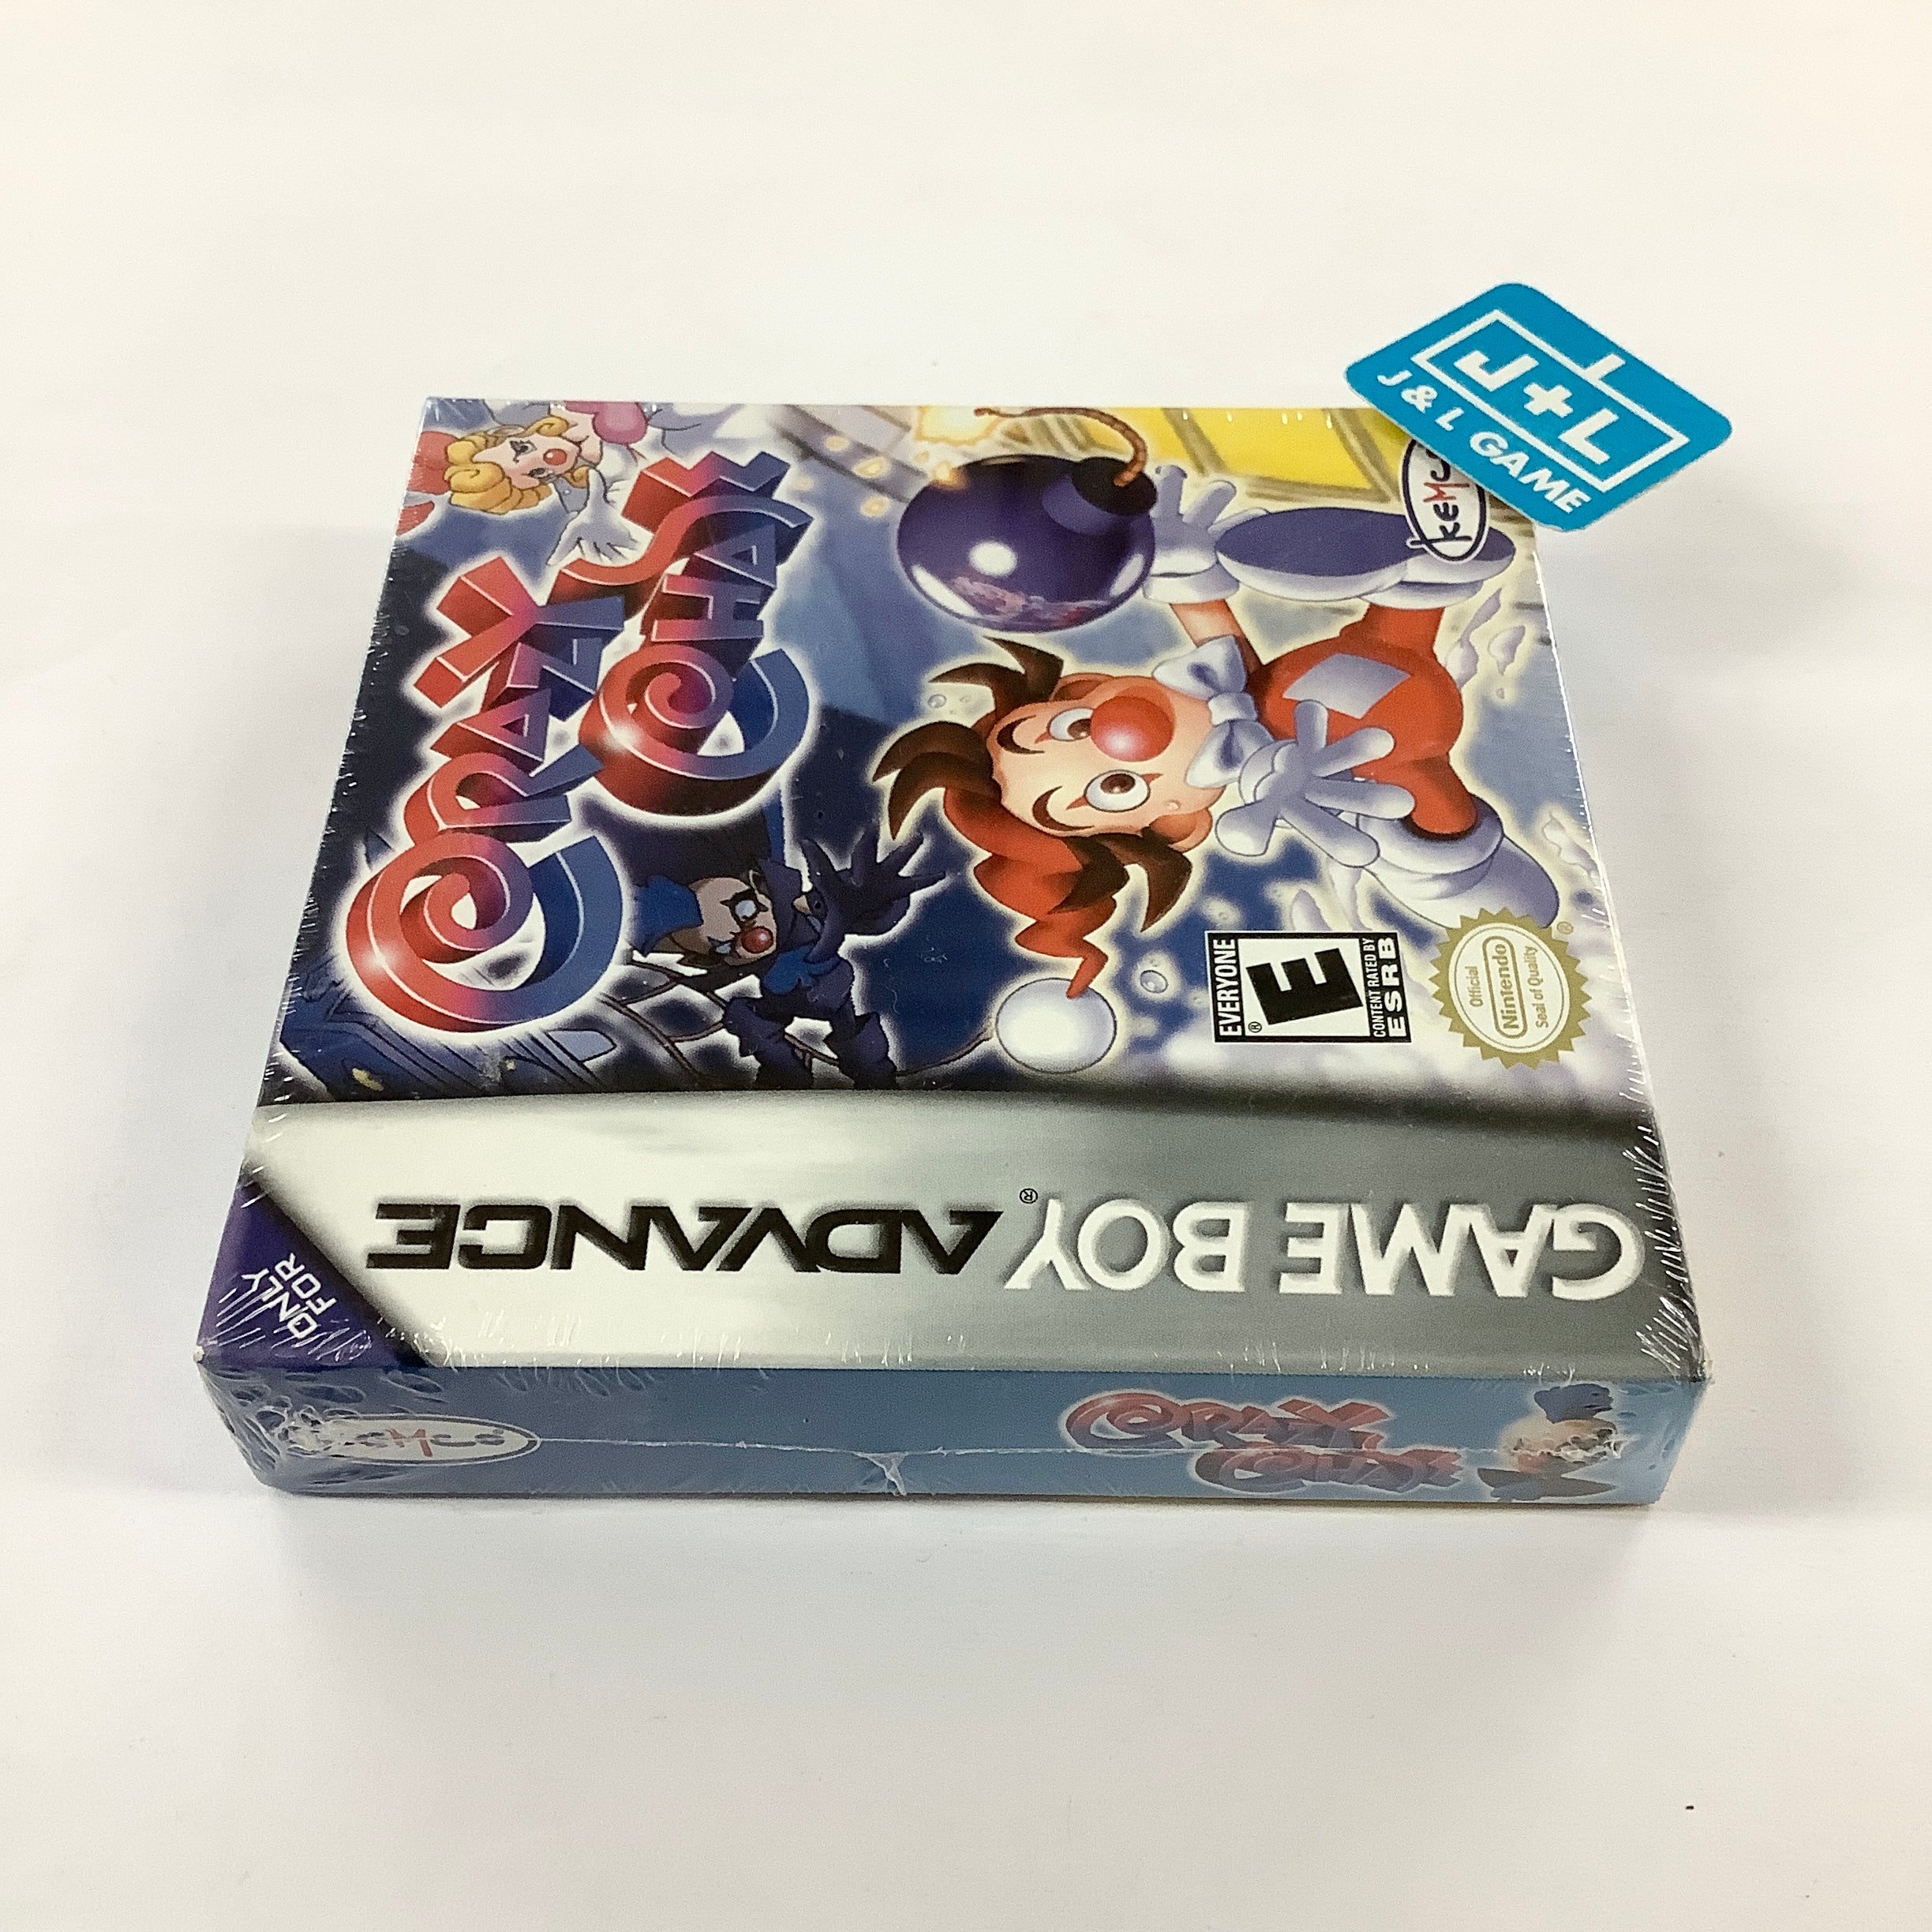 Crazy Chase - (GBA) Game Boy Advance Video Games Kemco   